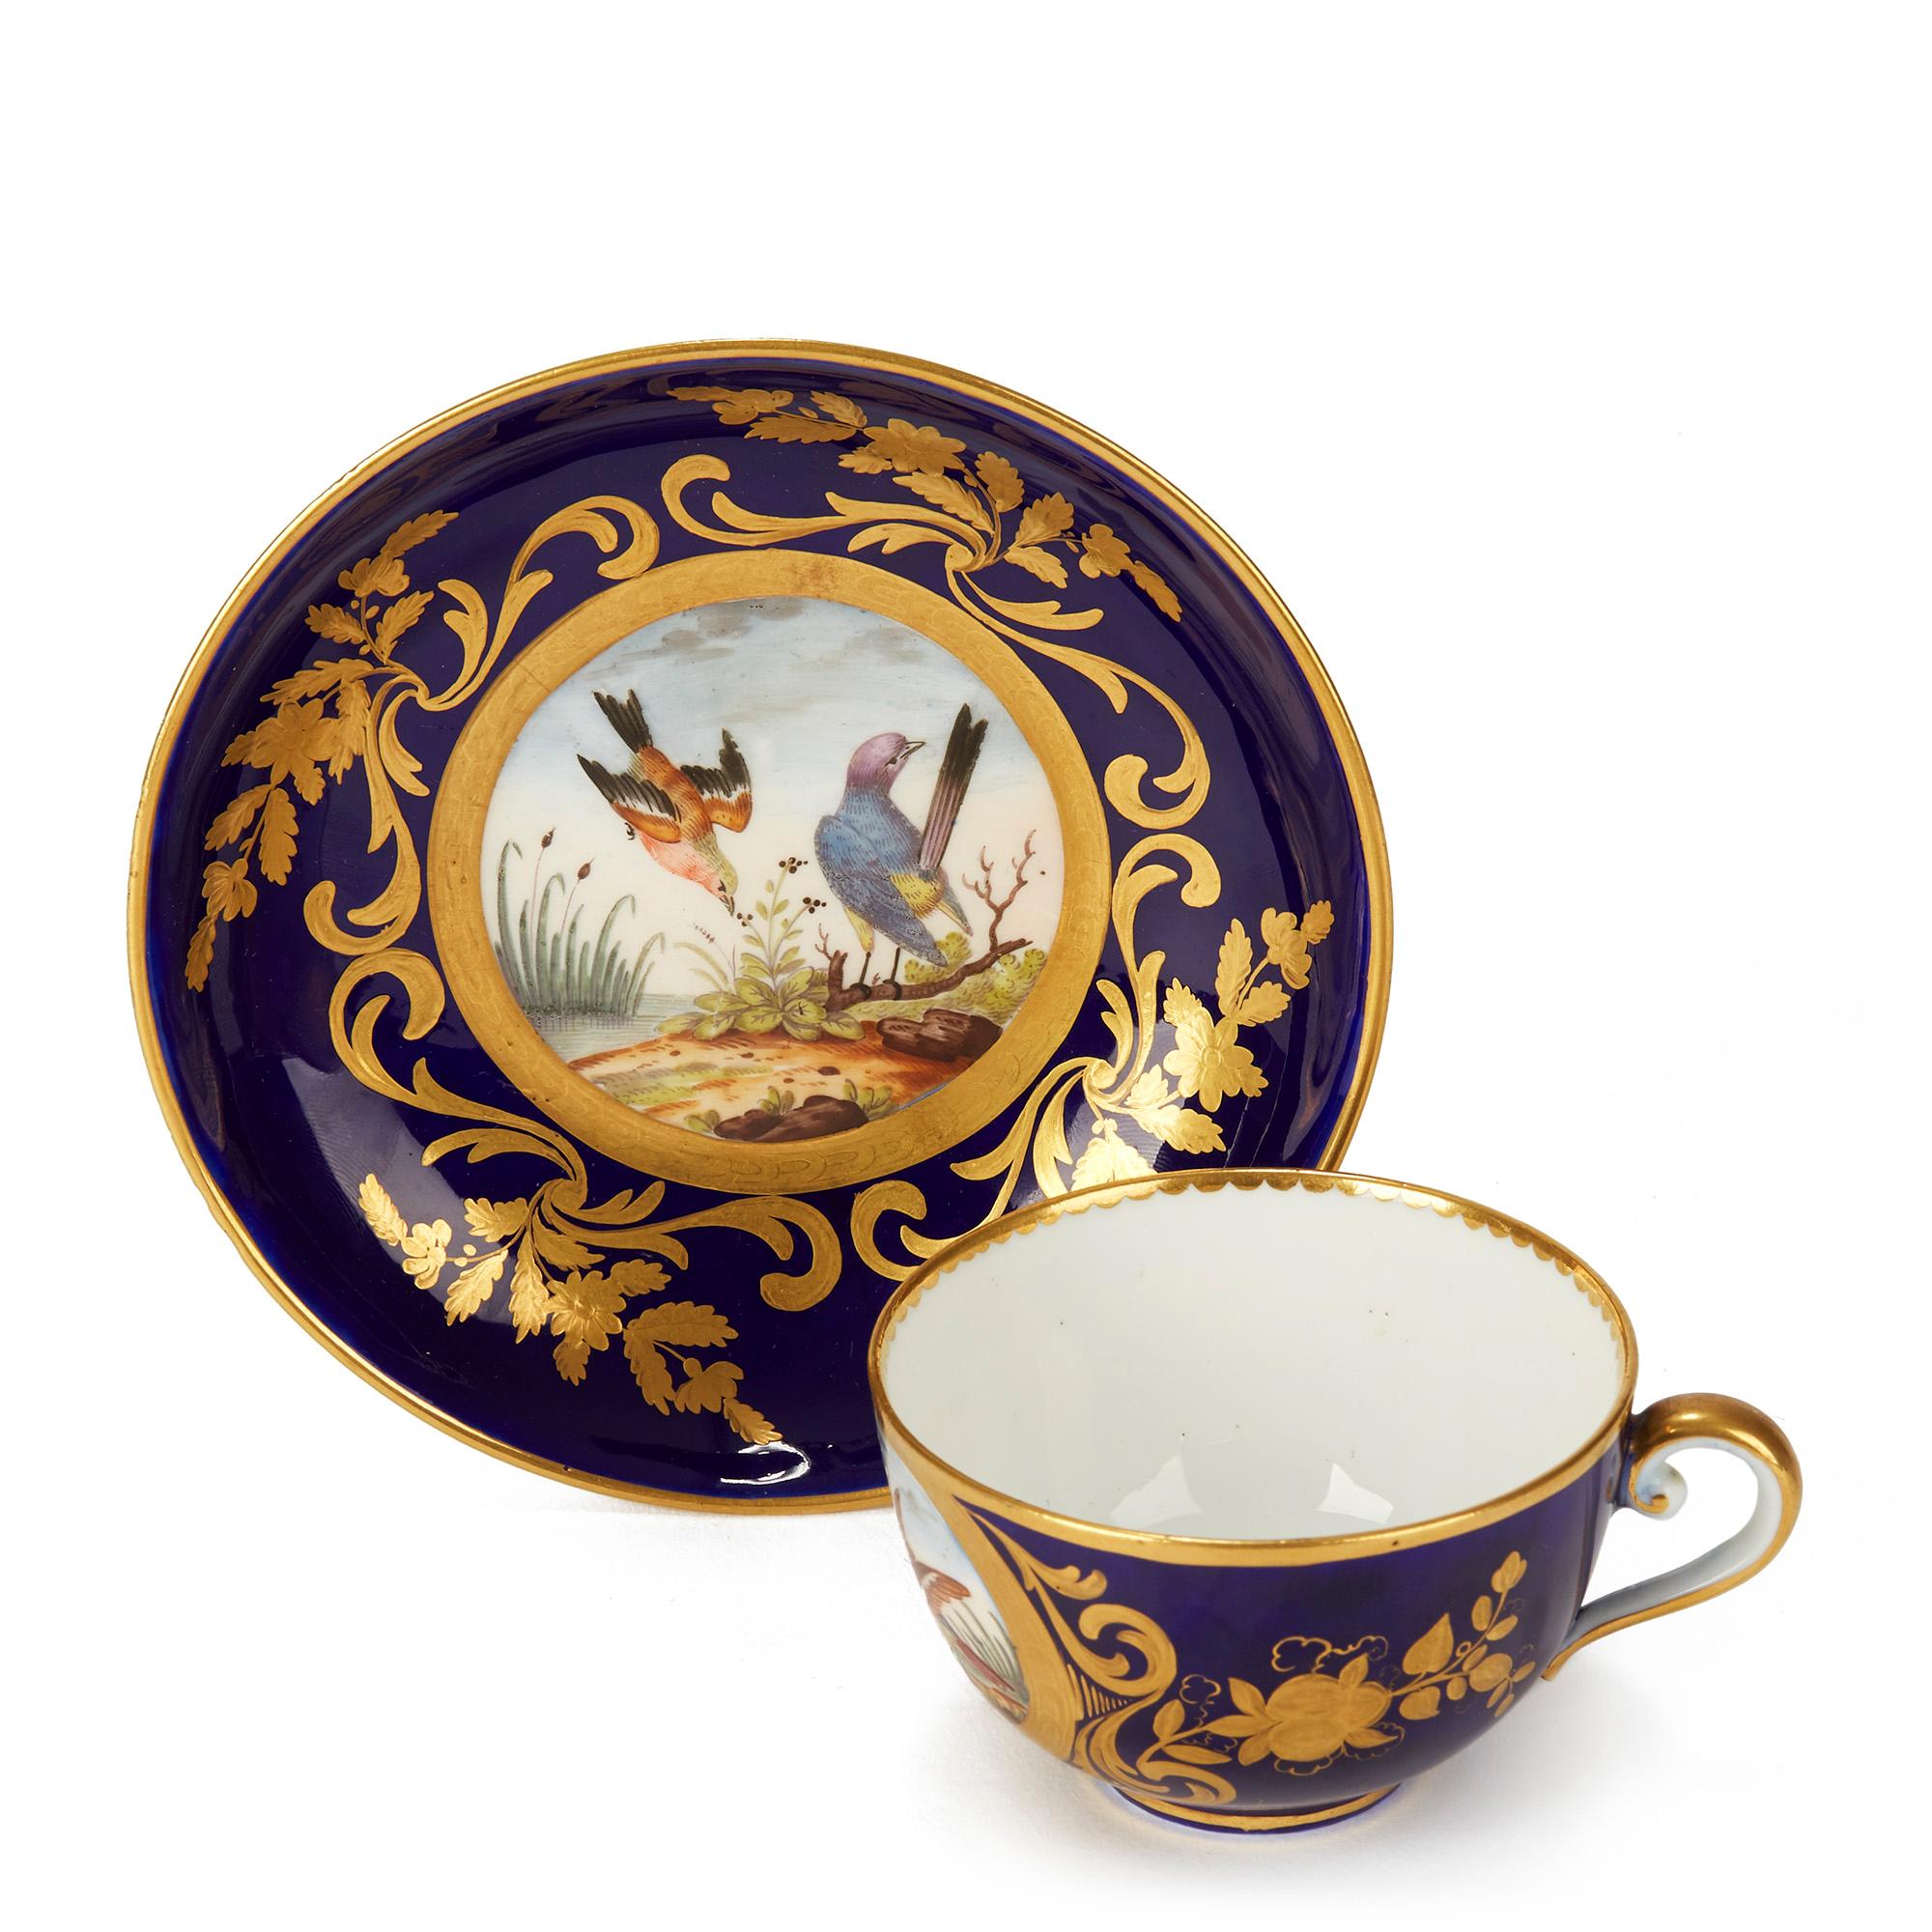 An exceptional and rare Sèvres Porcelain cabinet teacup and saucer each hand painted with birds within a landscape in coloured enamels and set within a cobalt blue surround exquisitely highlighted with gilding patterns including scrolling leaf